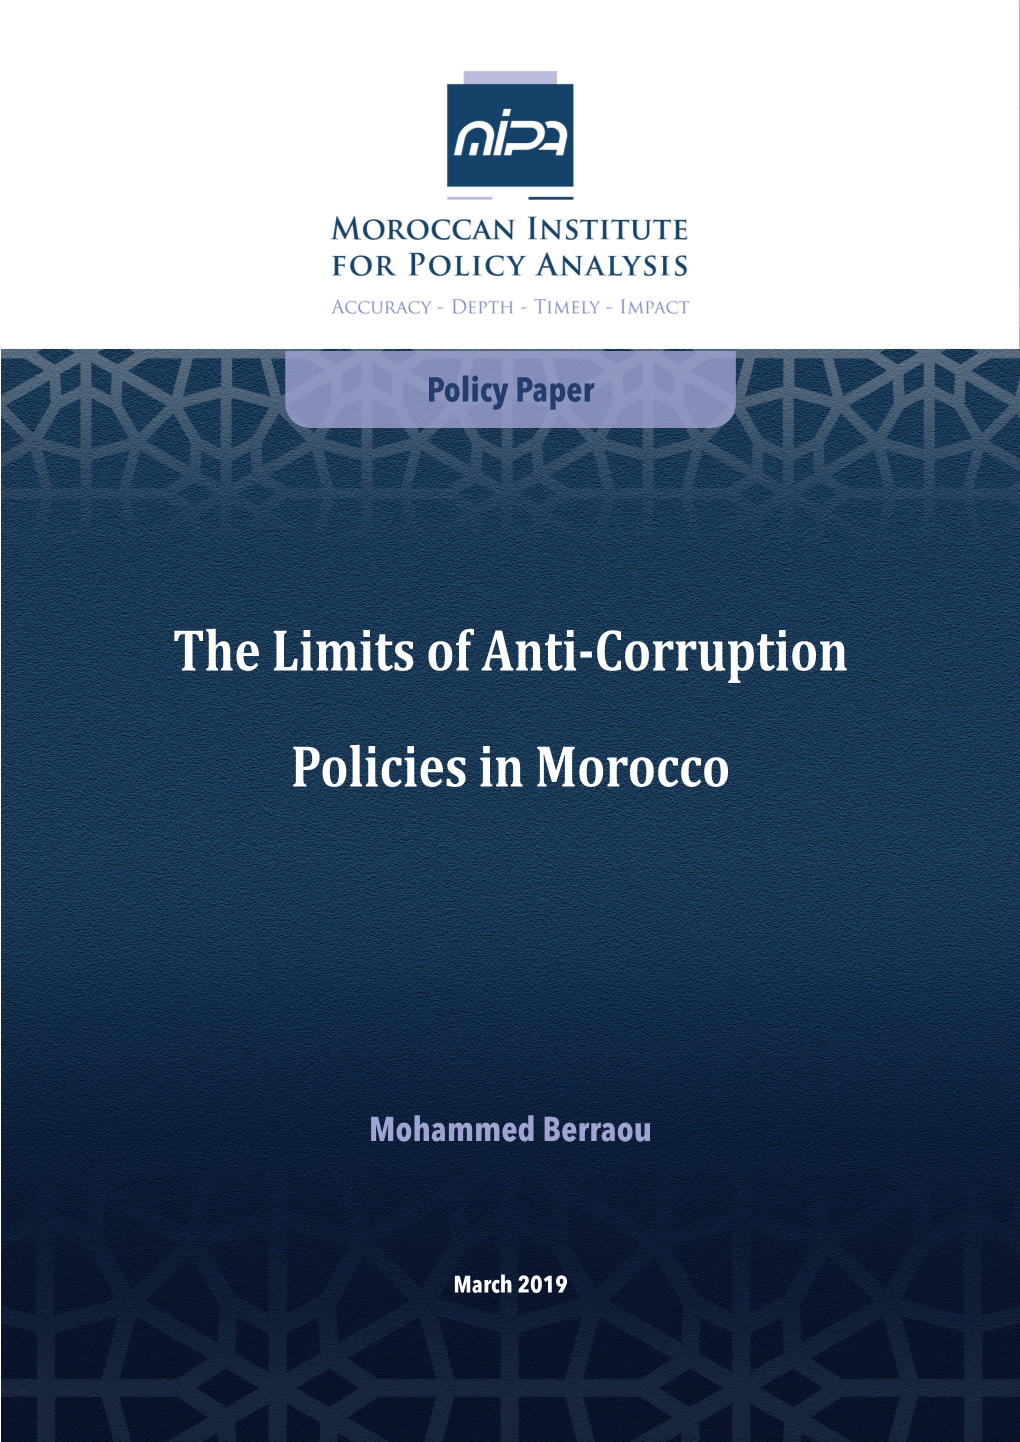 The Limits of Anti-Corruption Policies in Morocco